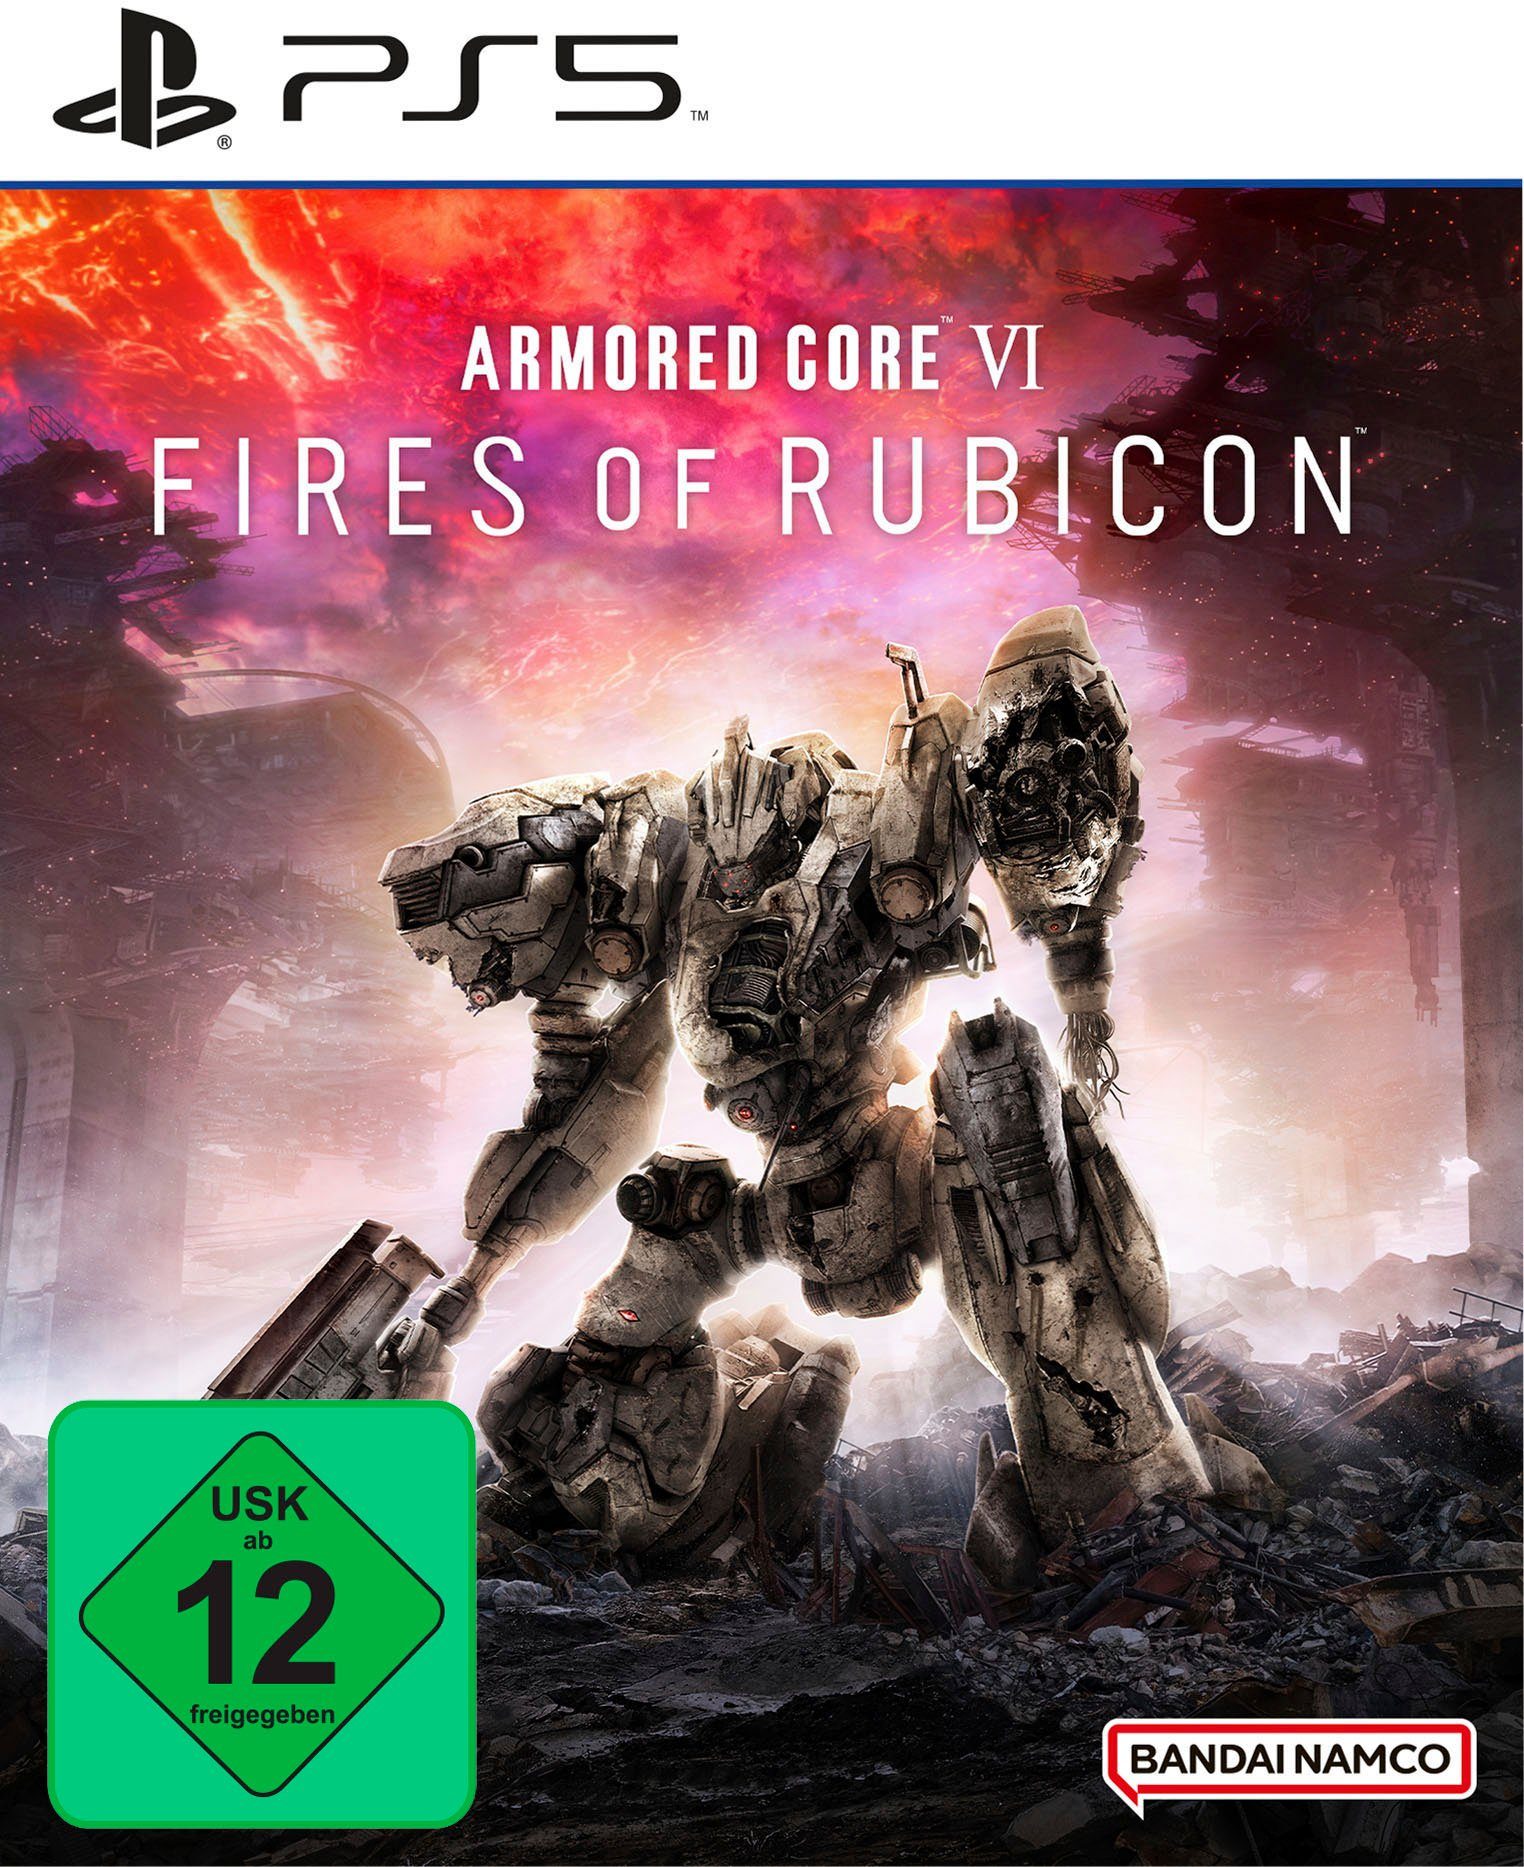 Rubicon PlayStation of Fires Bandai Core Armored 5 Launch VI Edition